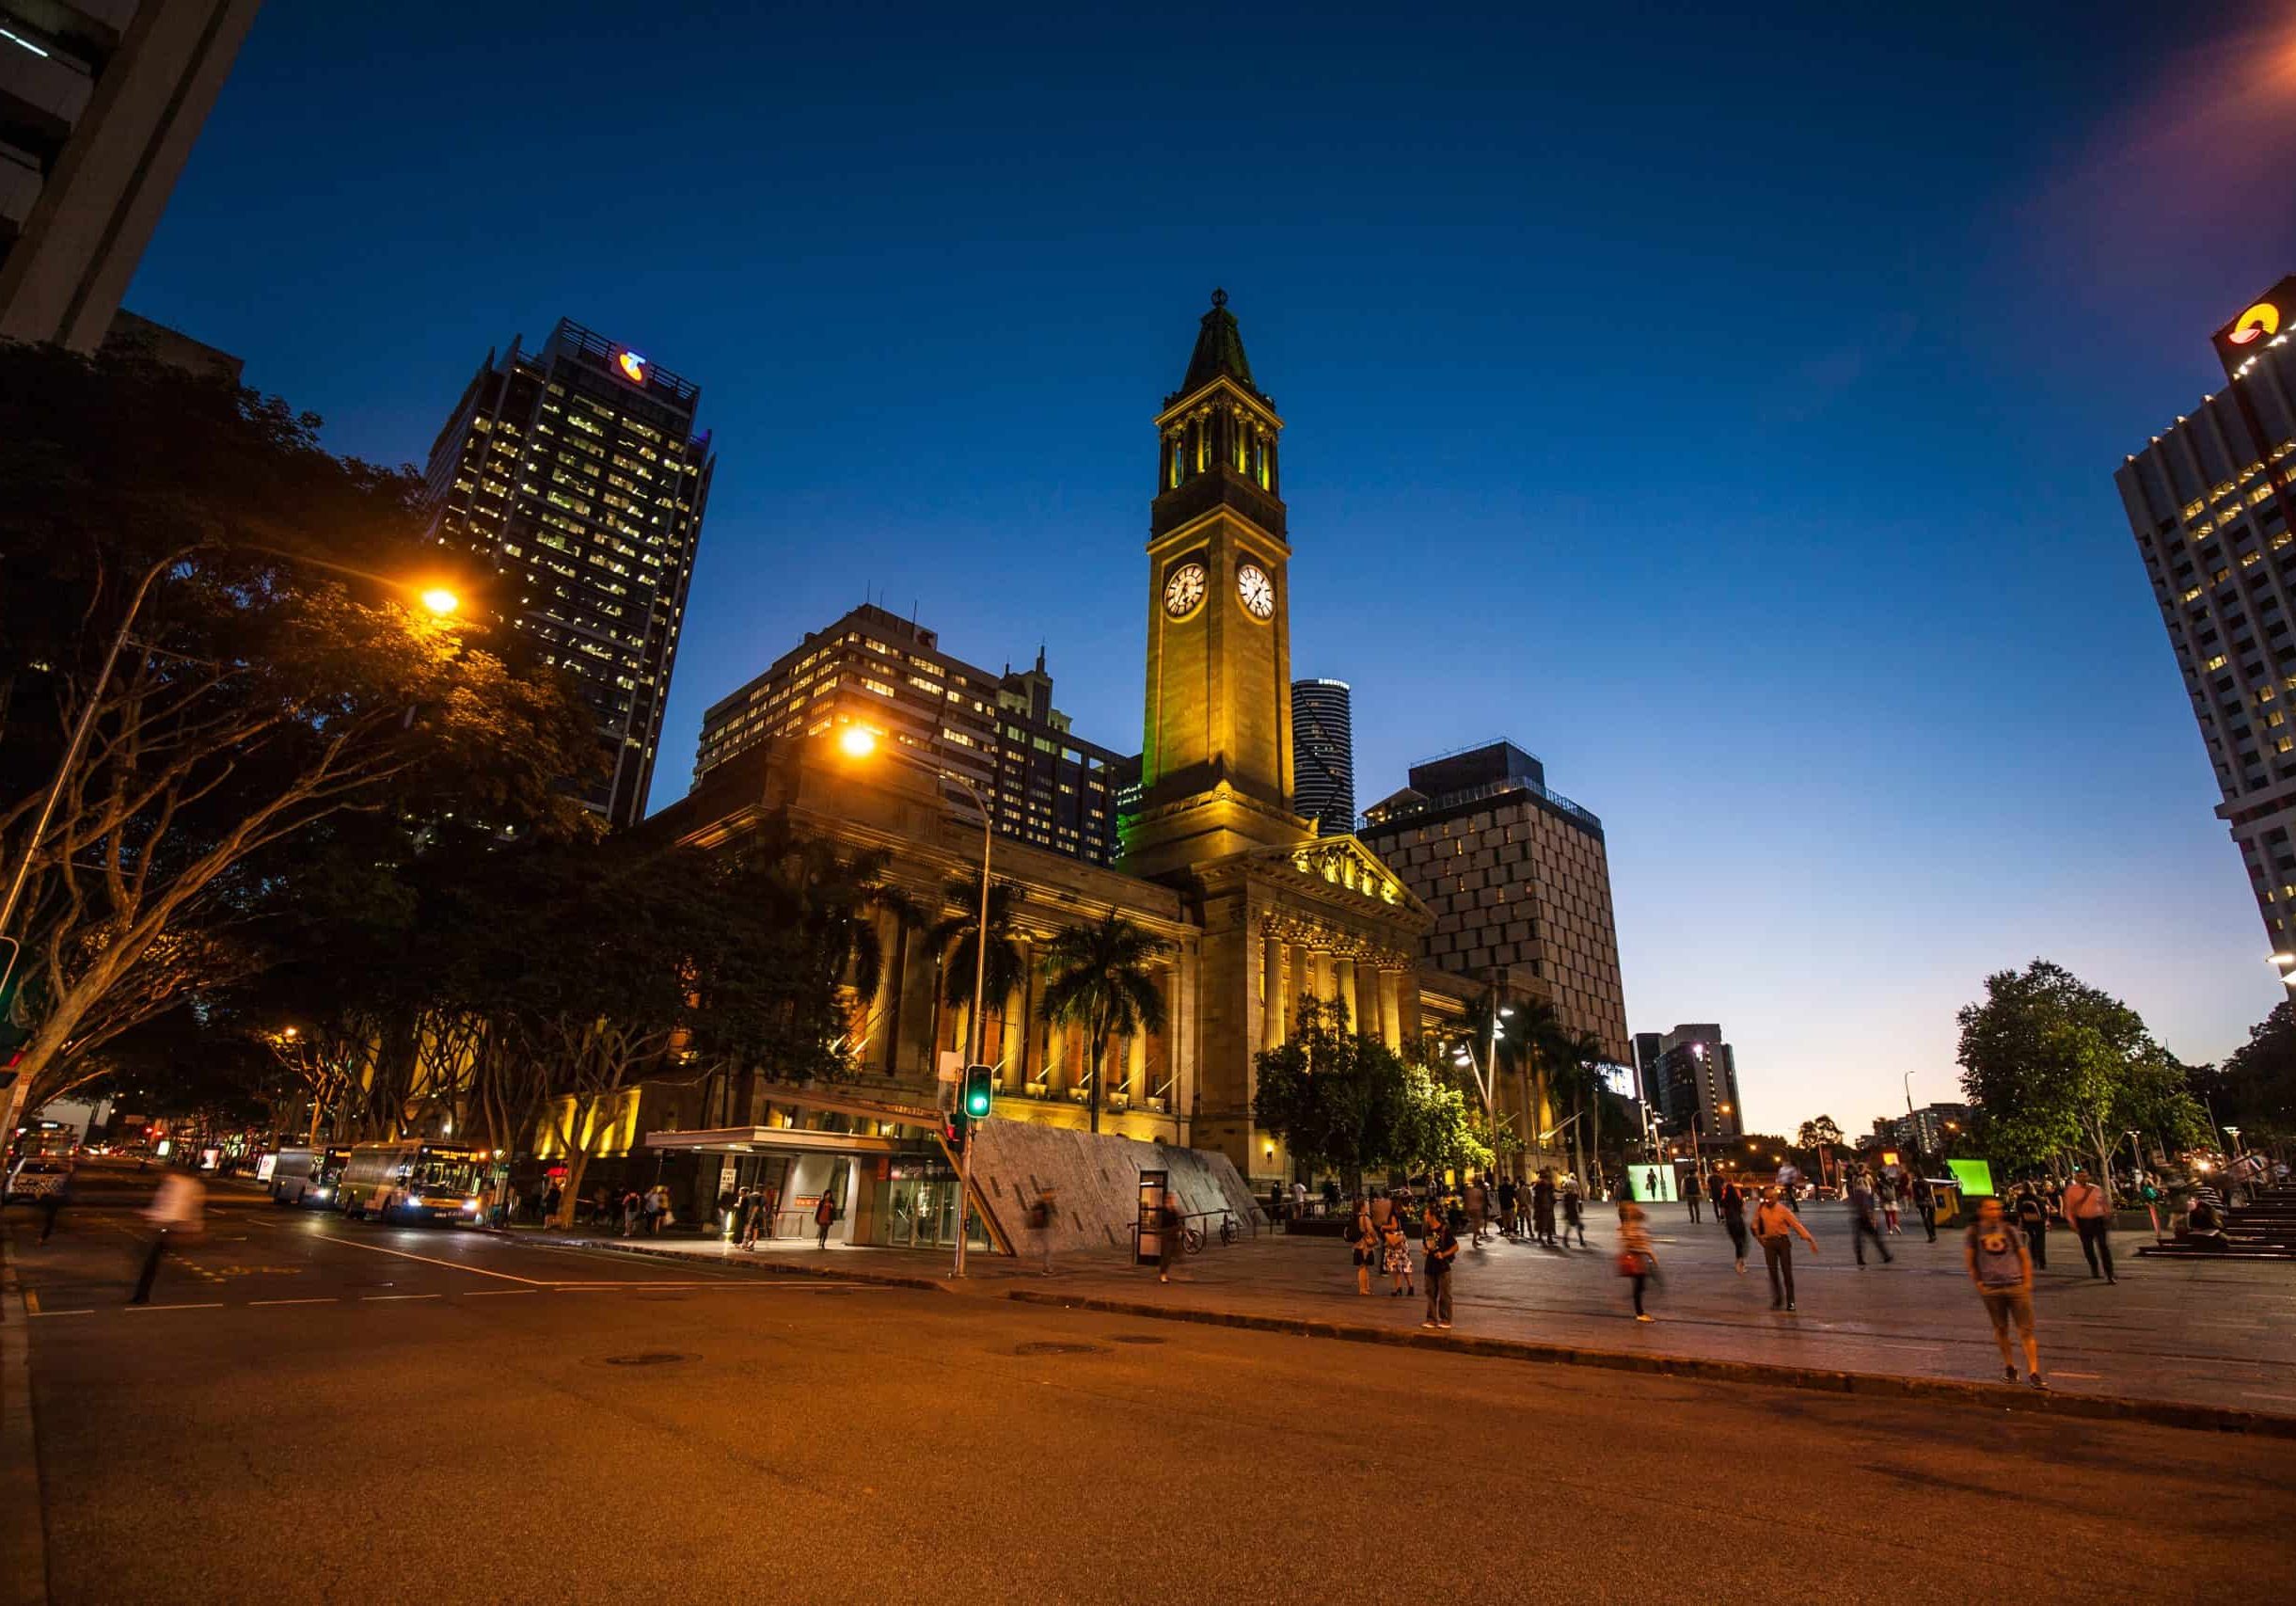 BRISBANE, AUSTRALIA - MAY 05: Brisbane City Hall, The building has been used for royal receptions, orchestral concerts, civic greetings, school graduations and political meetings on May 05, 2016